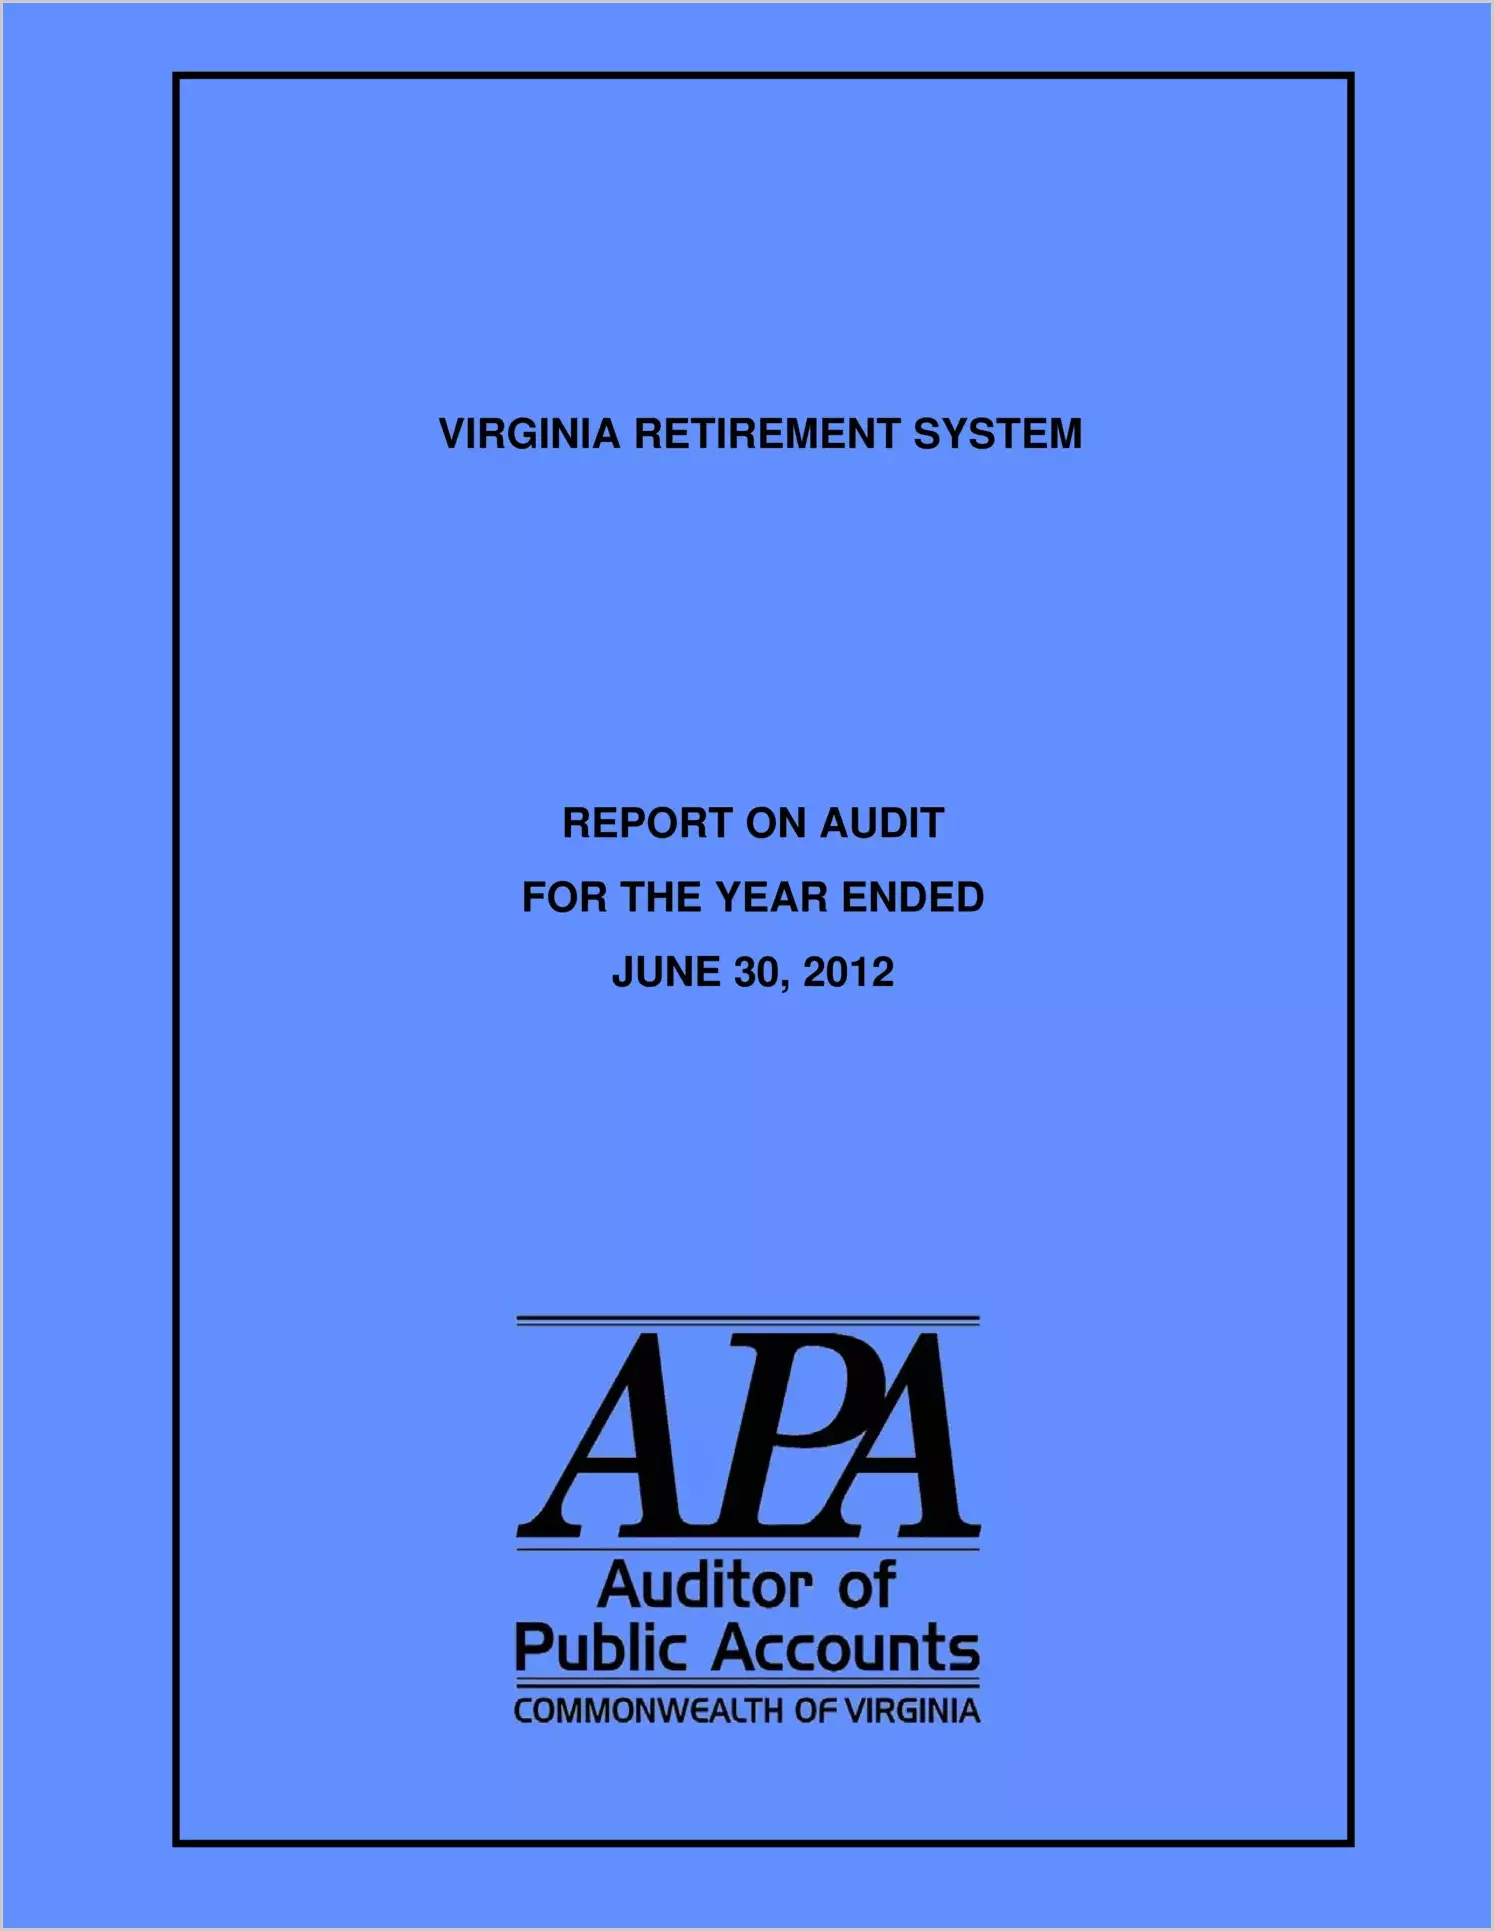 Virginia Retirement System for the year ended June 30, 2012